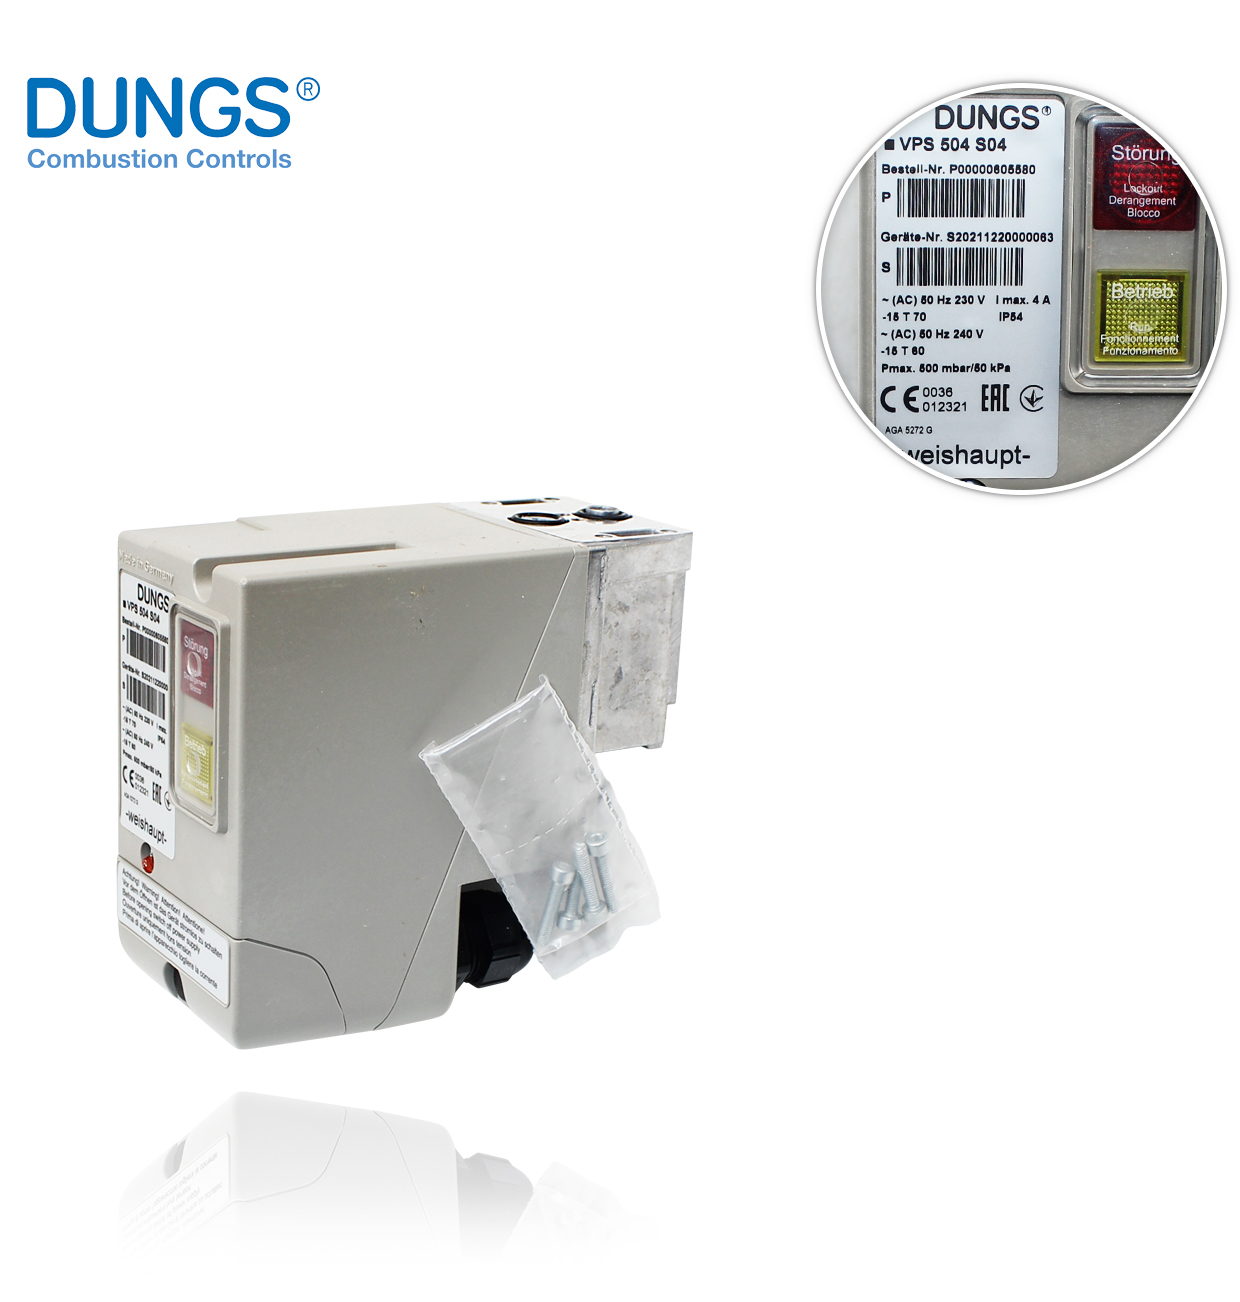 VPS 504 S04  LPG SPECIAL WEISHAUPT  AIRTIGHTNESS CONTROL DUNGS